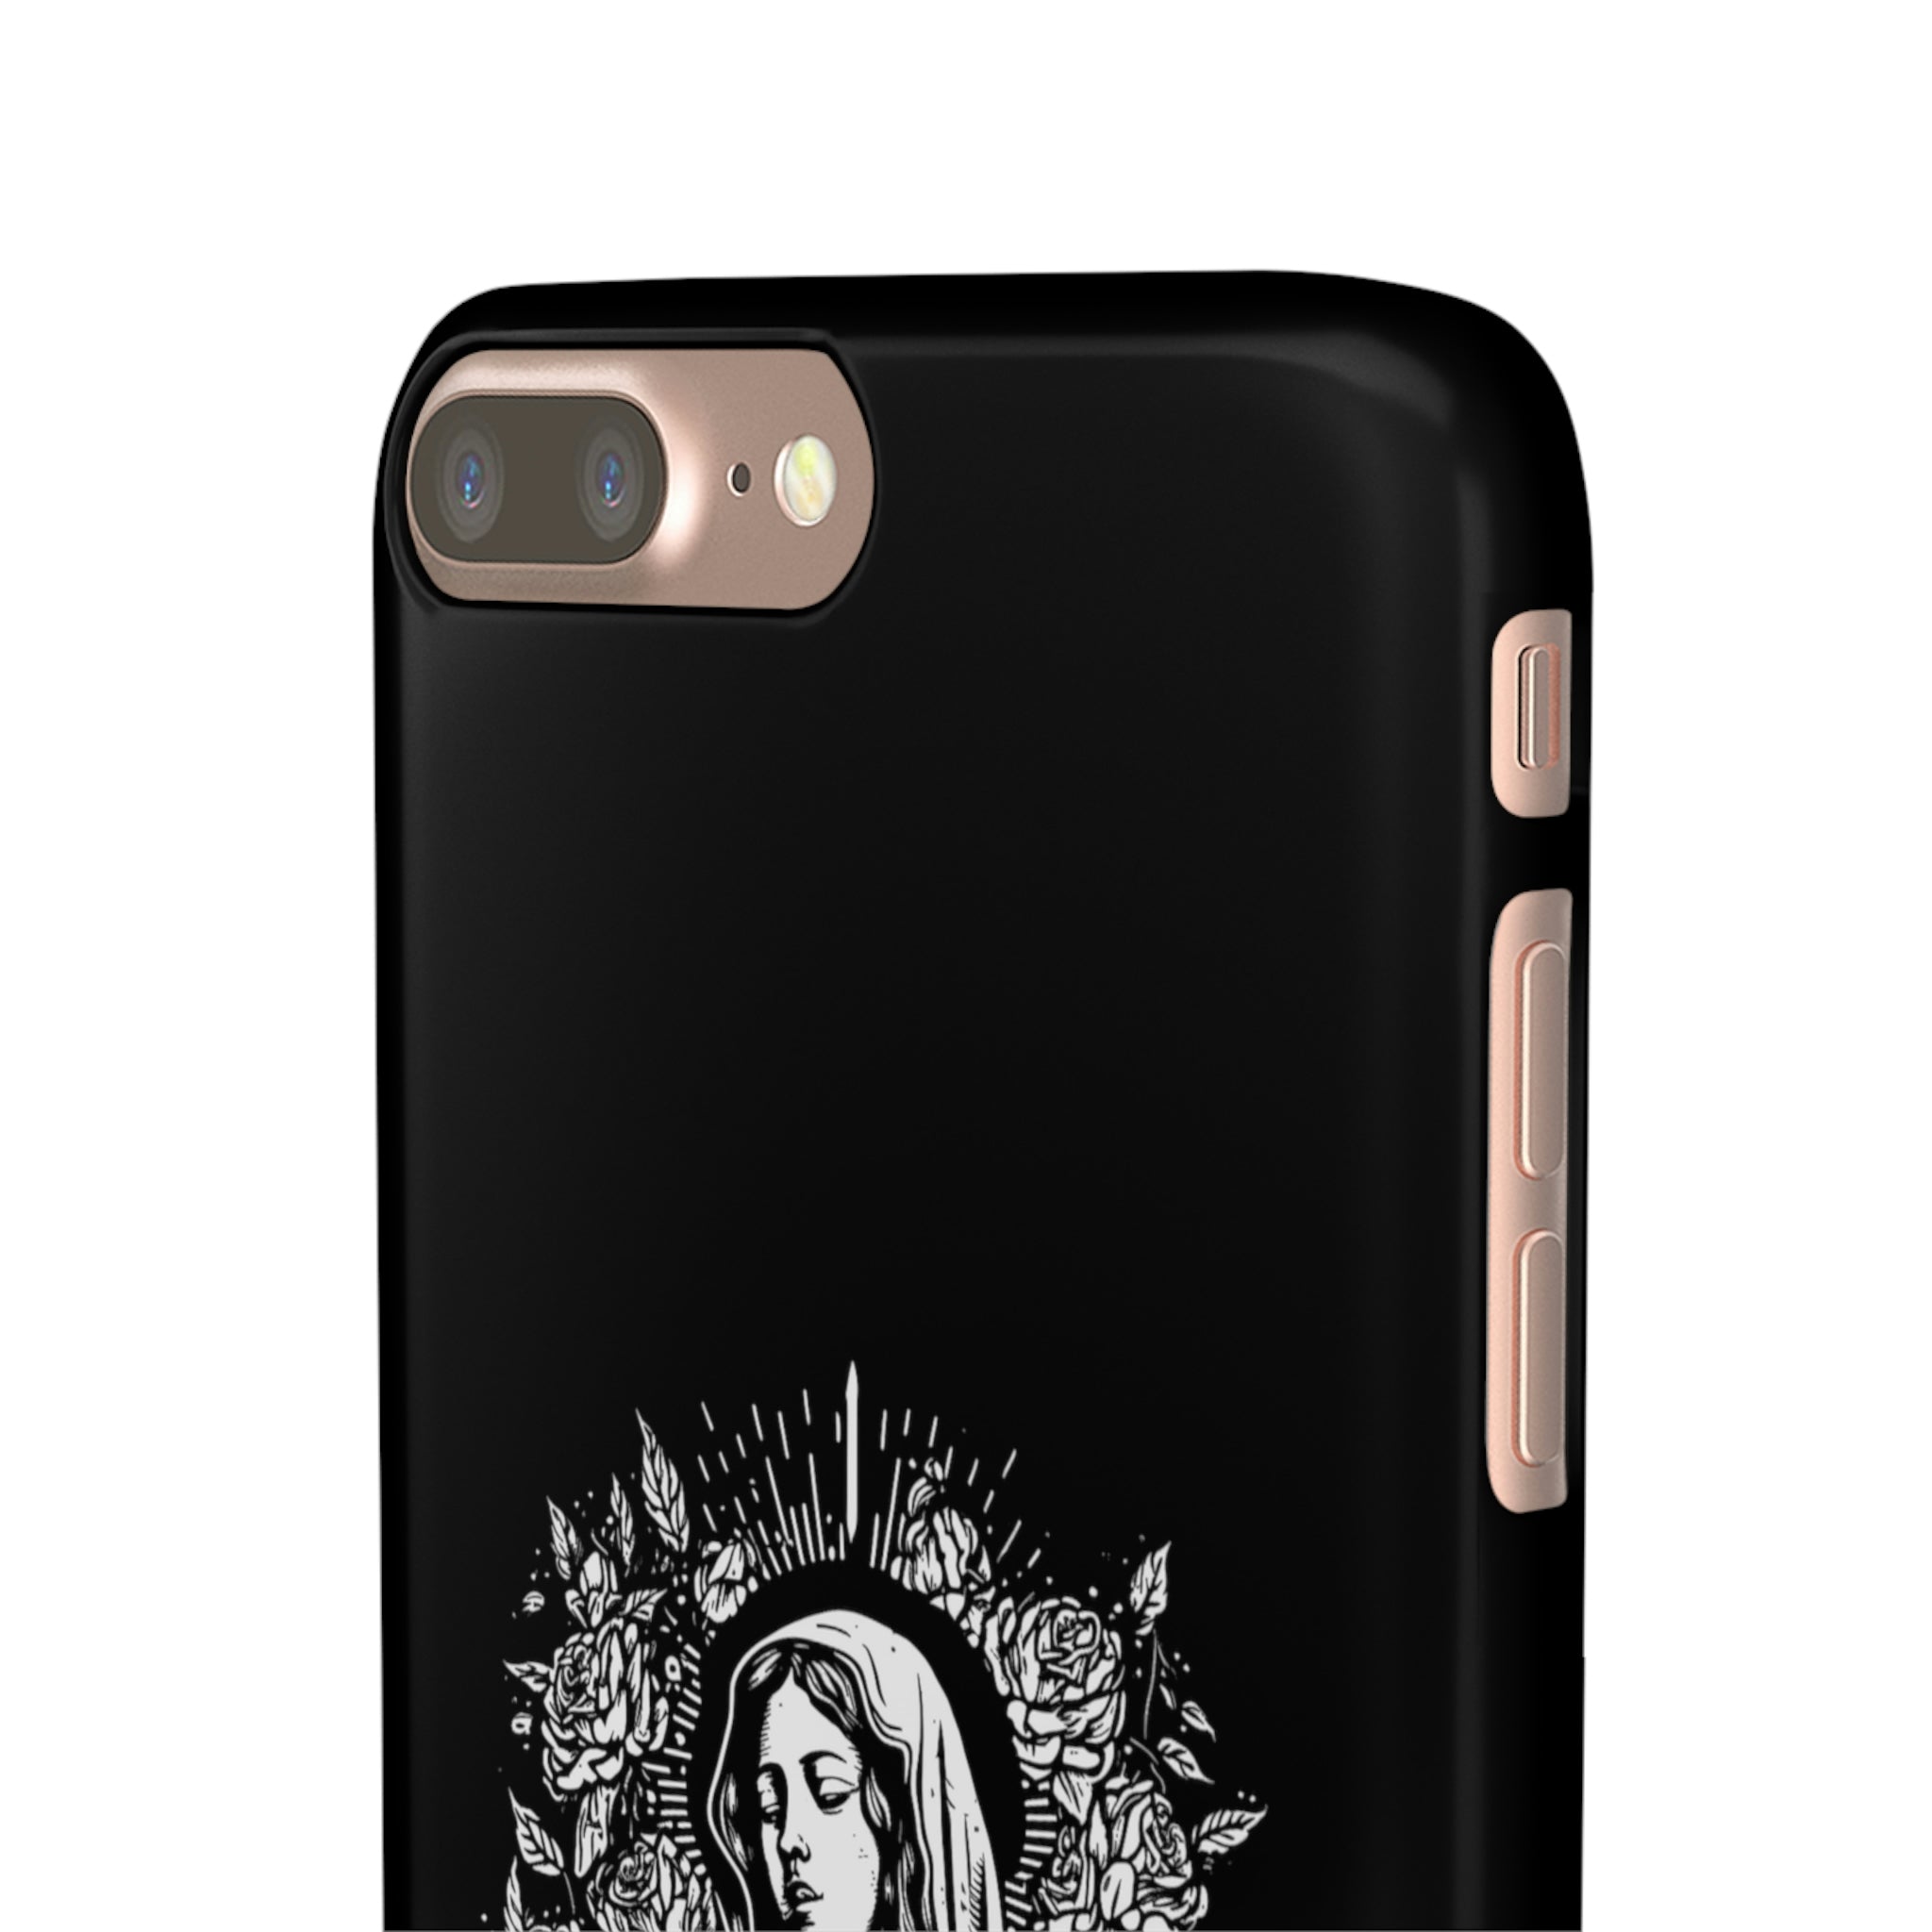 Mary Mother of God Phone Cases